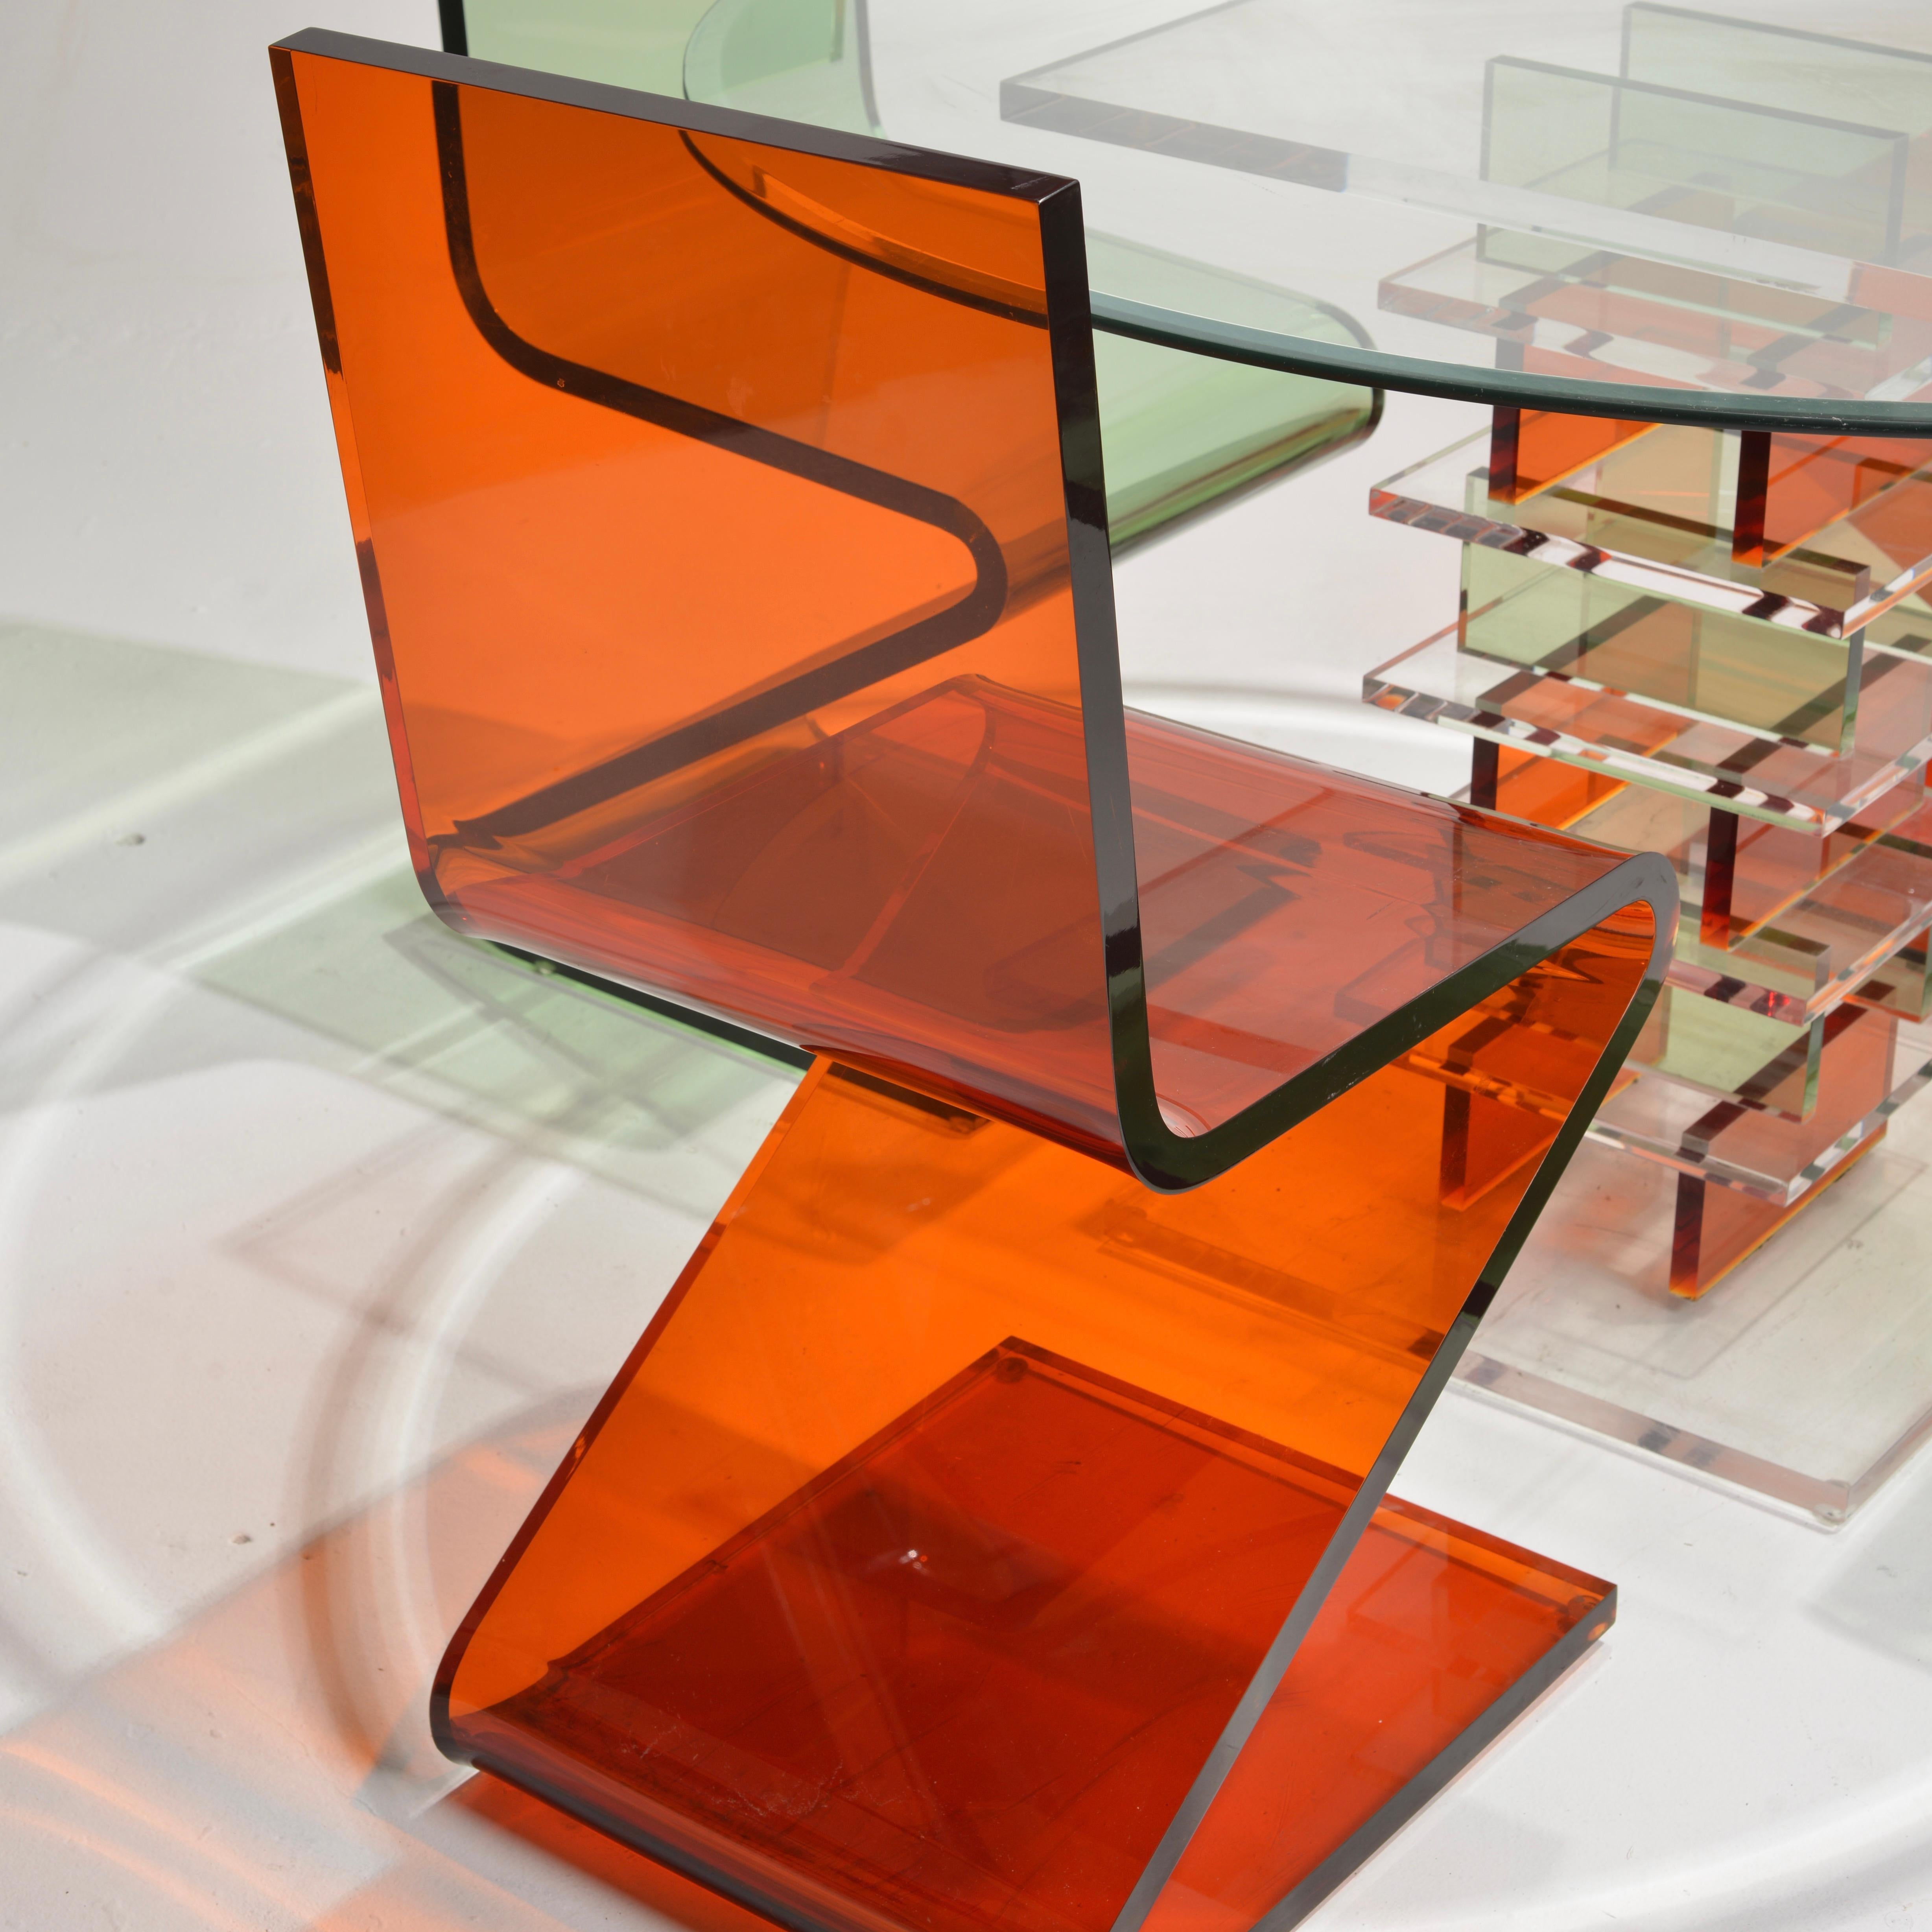 Vintage Lucite Z Table and Z Chairs by Shlomi Haziza for H Studio For Sale 2